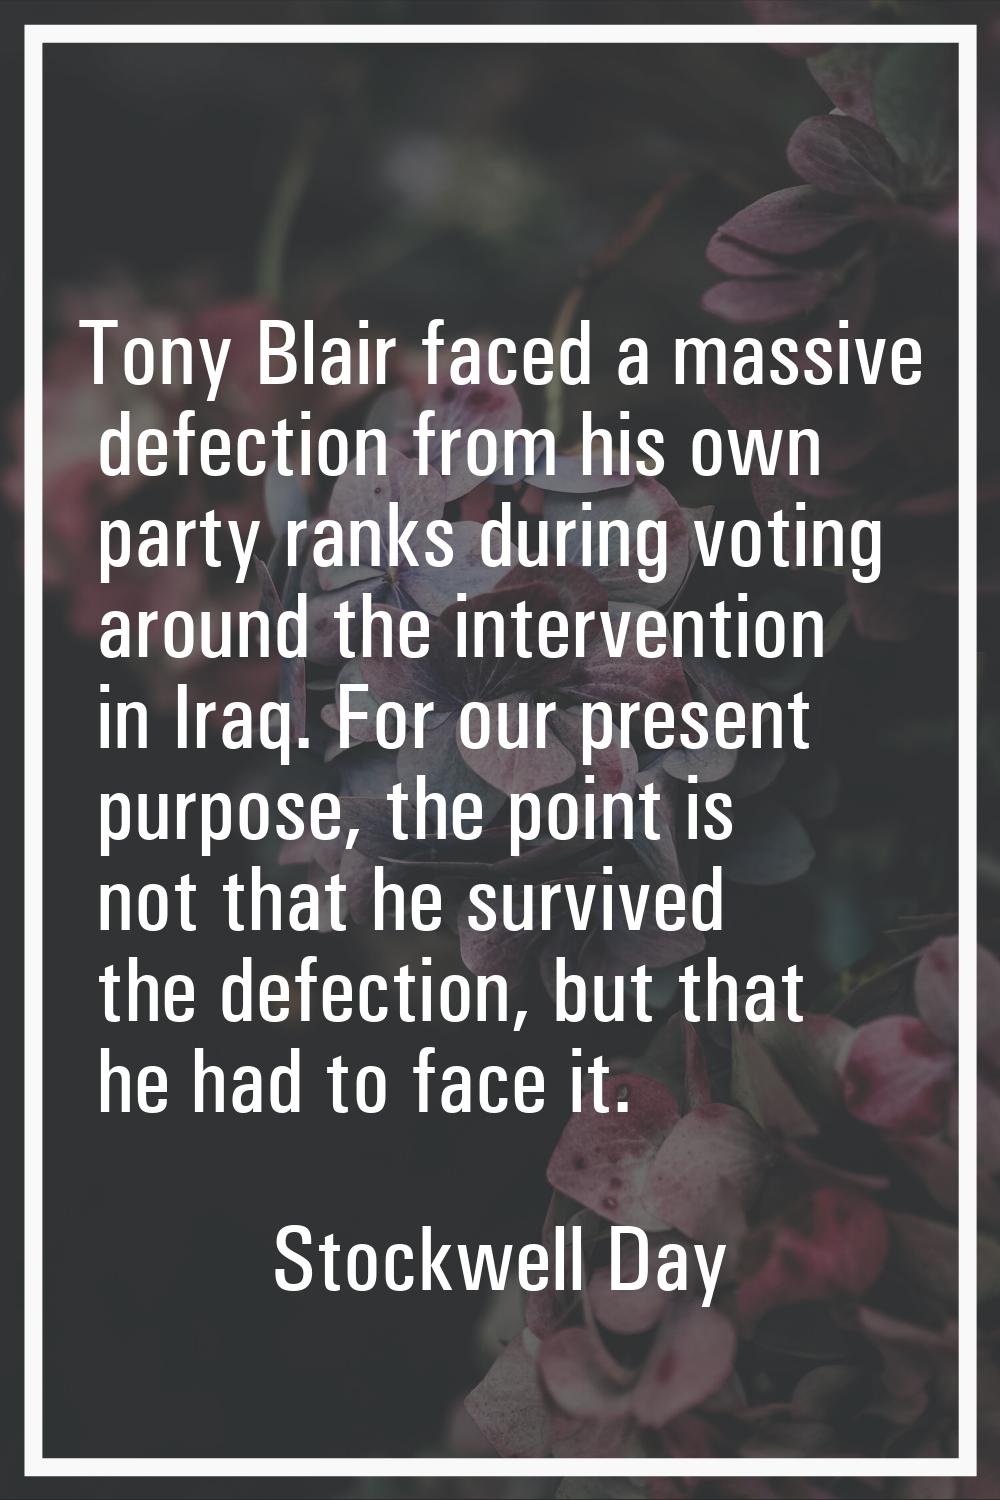 Tony Blair faced a massive defection from his own party ranks during voting around the intervention